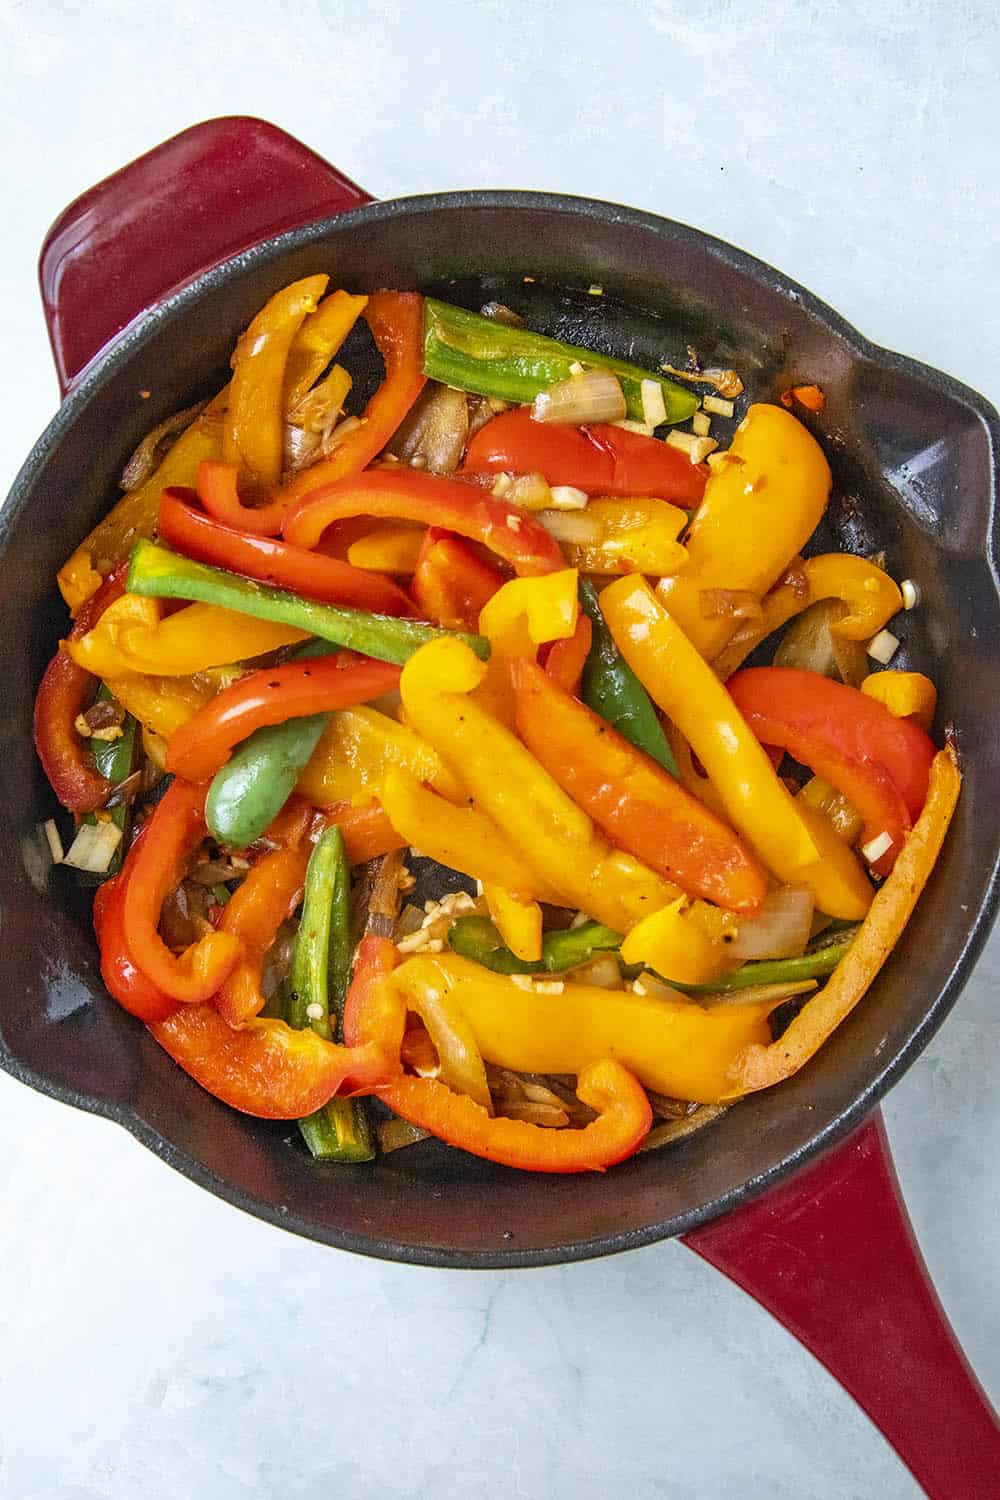 Cooking down the peppers